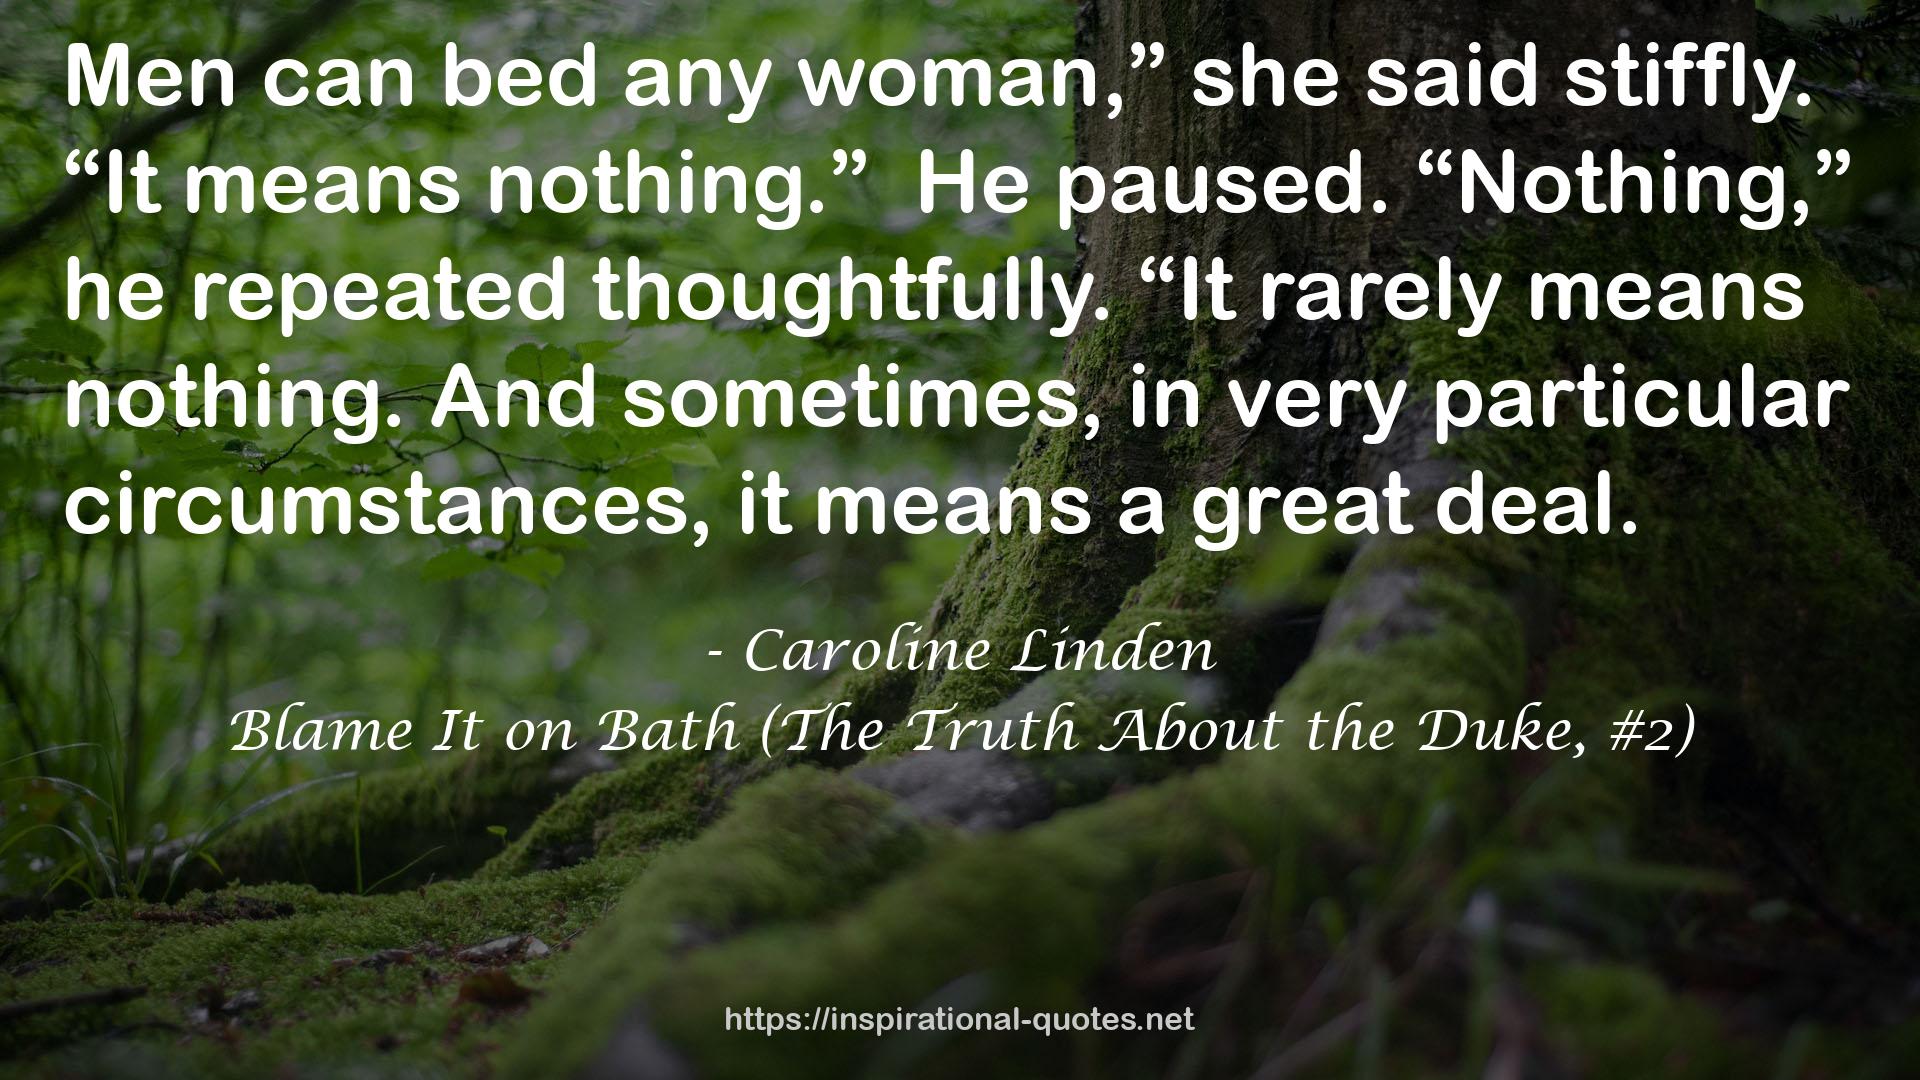 Blame It on Bath (The Truth About the Duke, #2) QUOTES